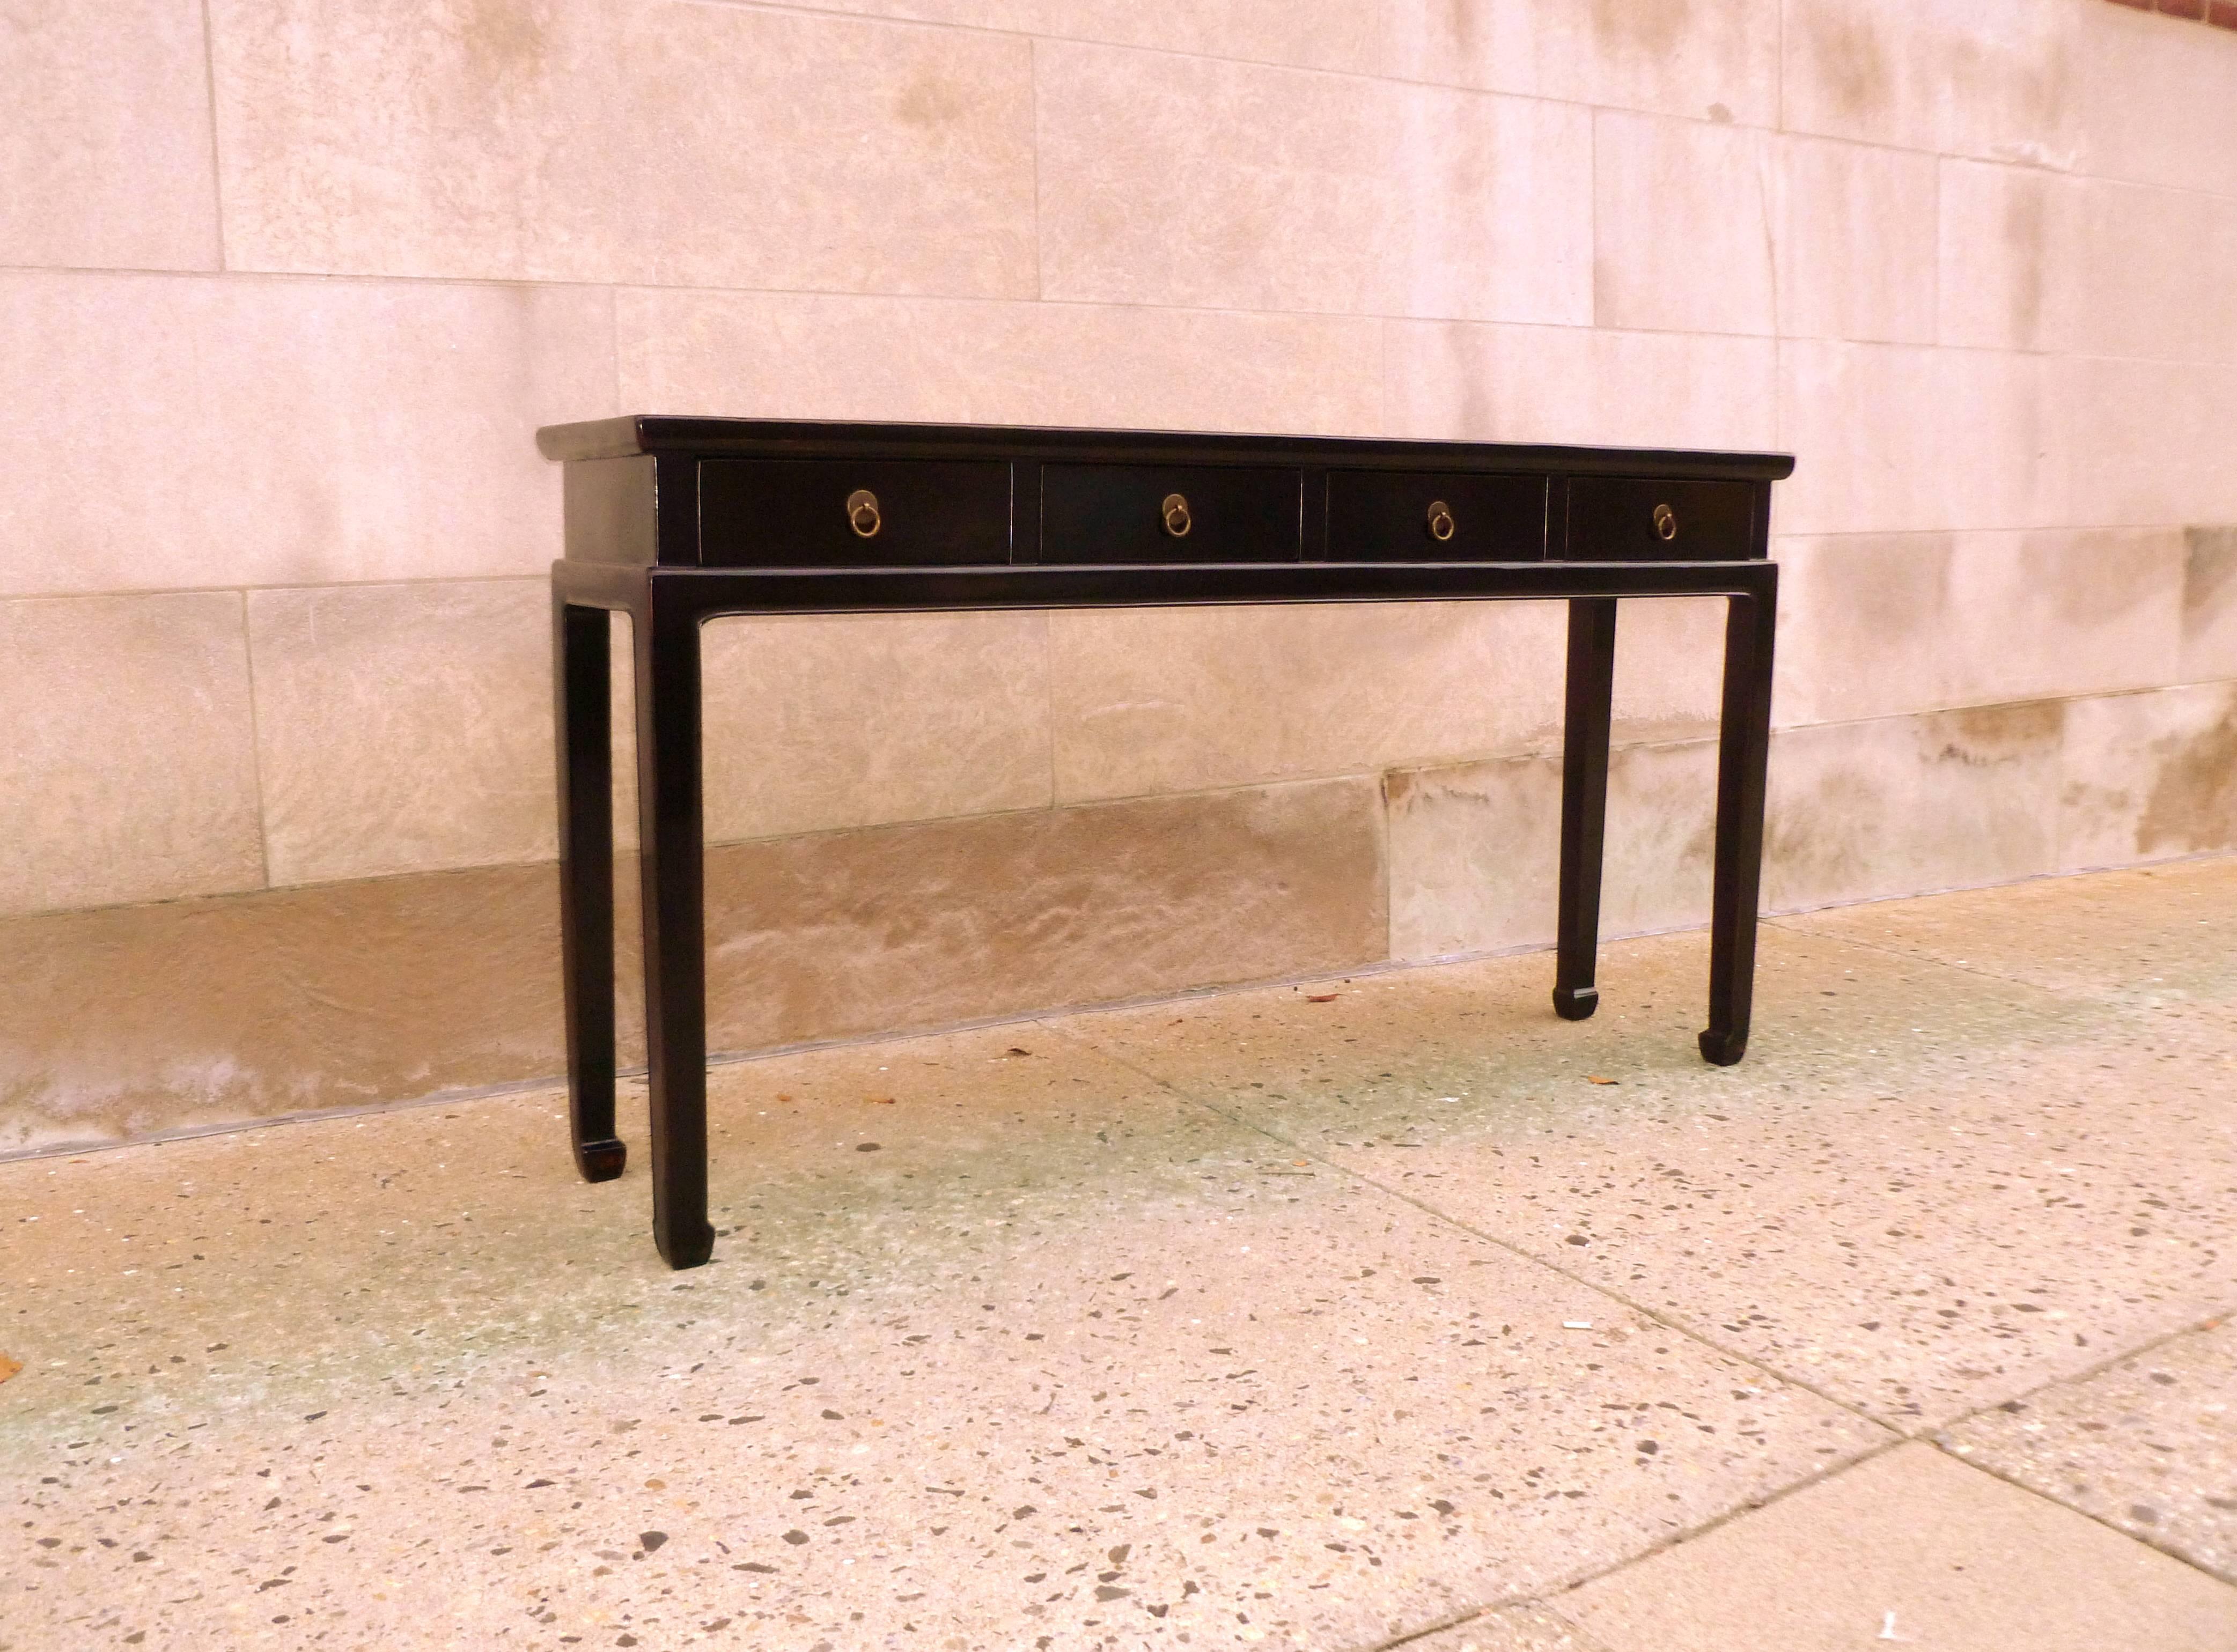 Early 20th Century Fine Black Lacquer Console Table with Drawers